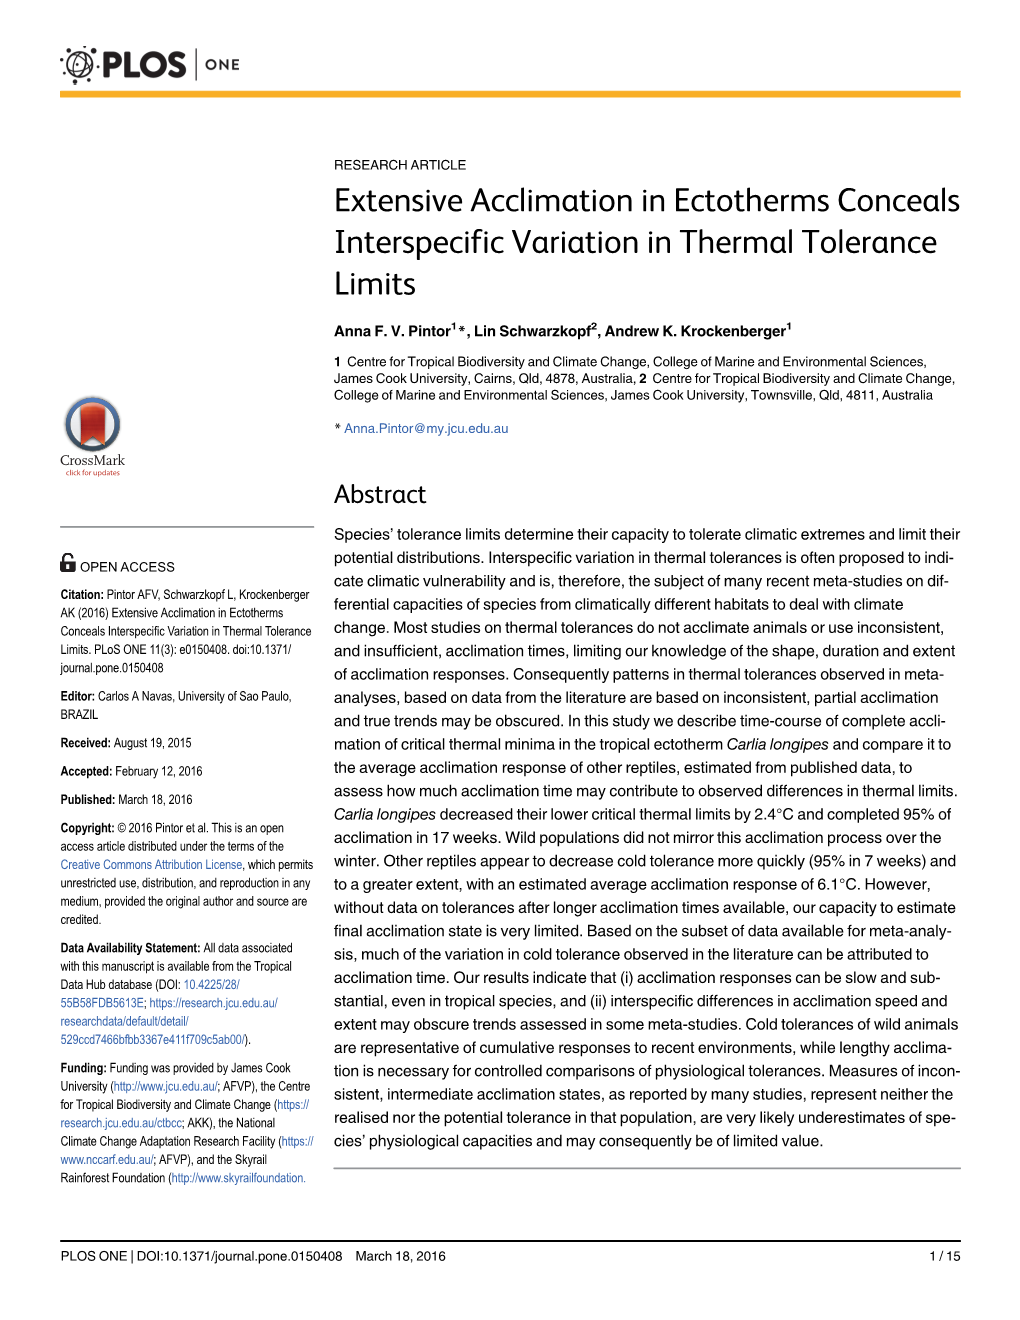 Extensive Acclimation in Ectotherms Conceals Interspecific Variation in Thermal Tolerance Limits